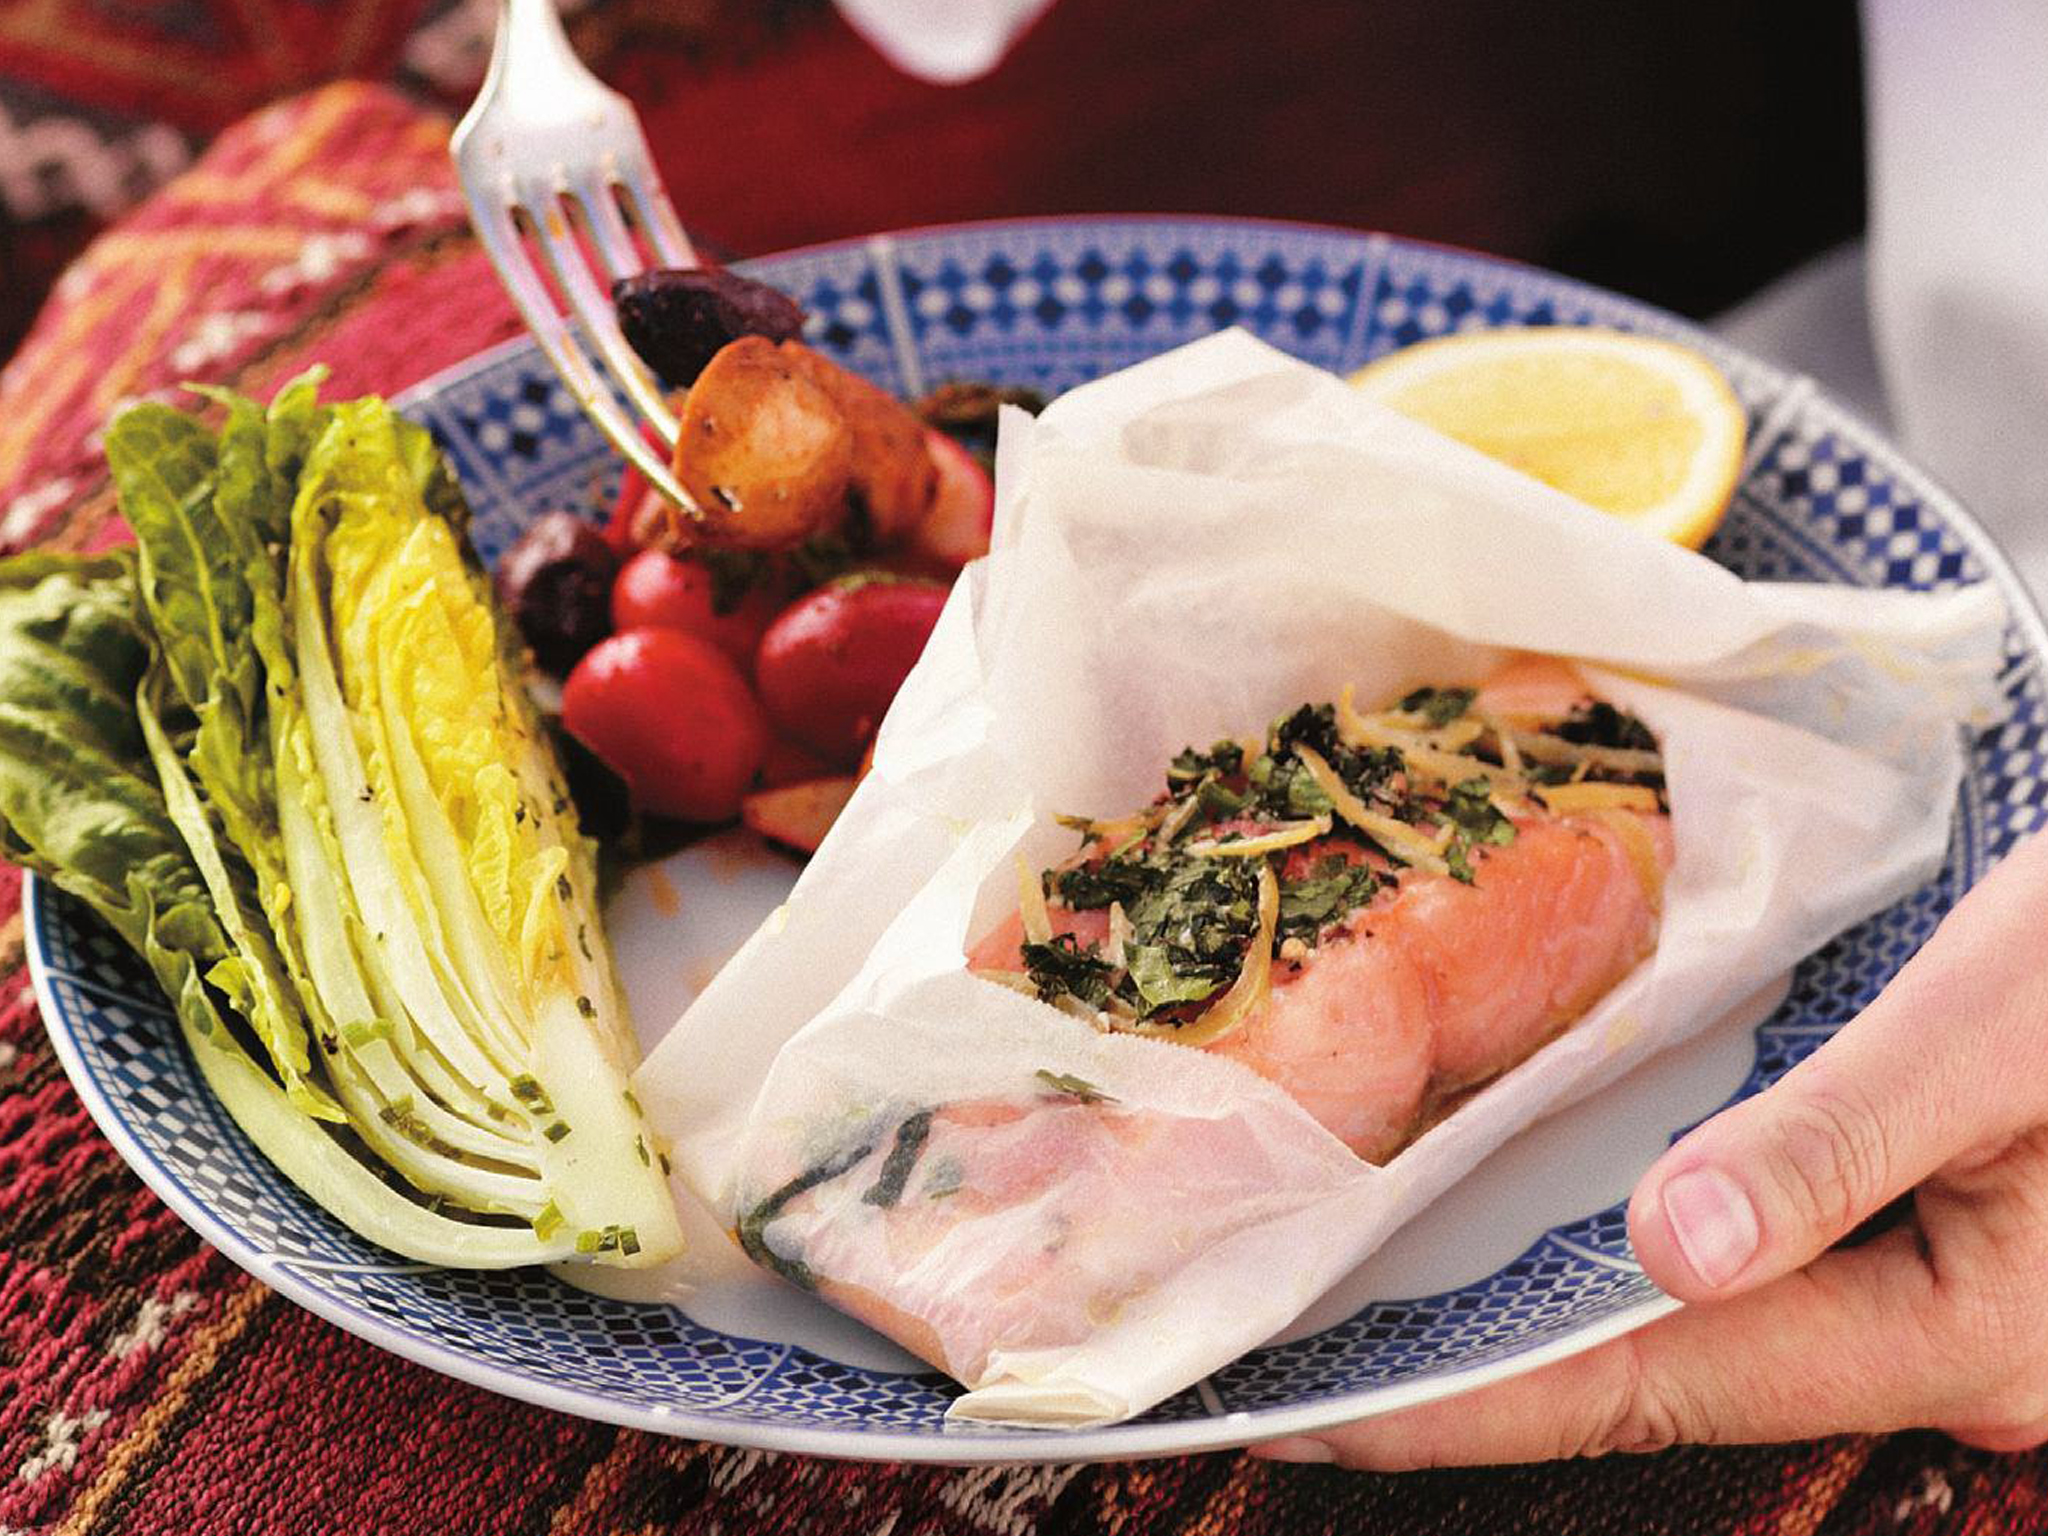 Salmon baked in paper with preserved lemon and herbs